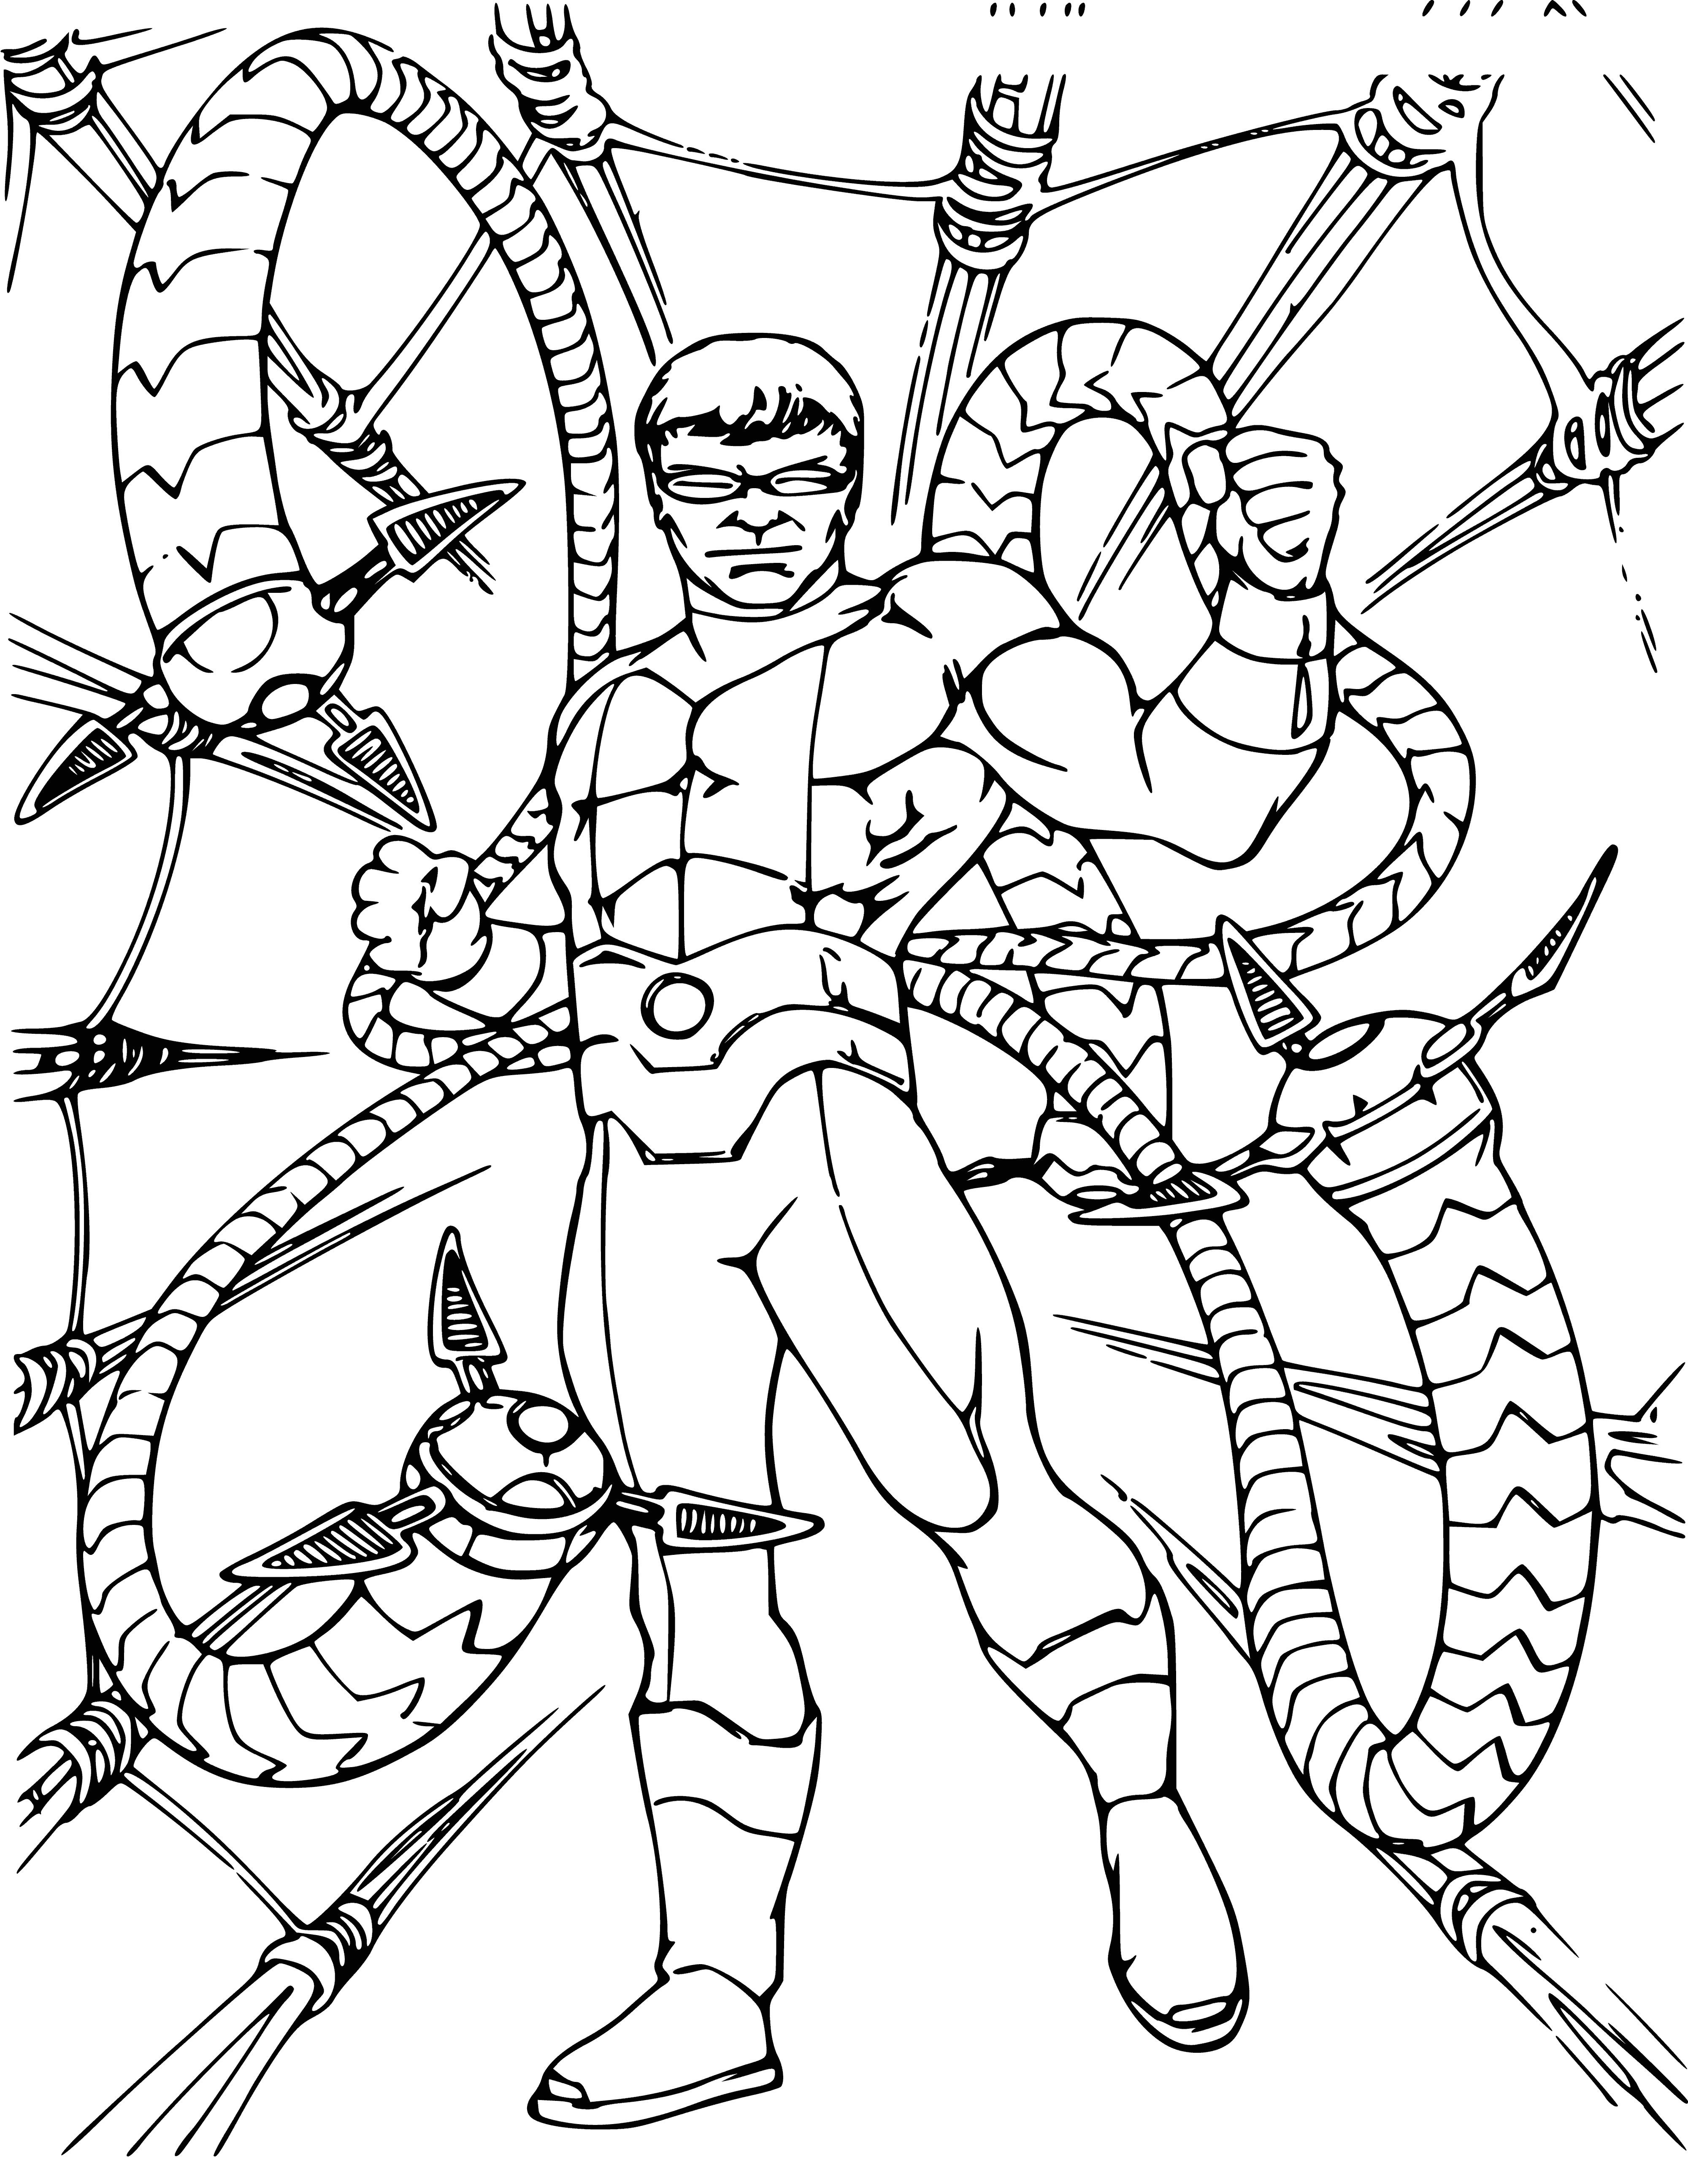 coloring page: Spiderman fights Doctor Octopus, sweat dripping from face, determined look on his face. Doctor Octopus clasps tightly with metal arms.